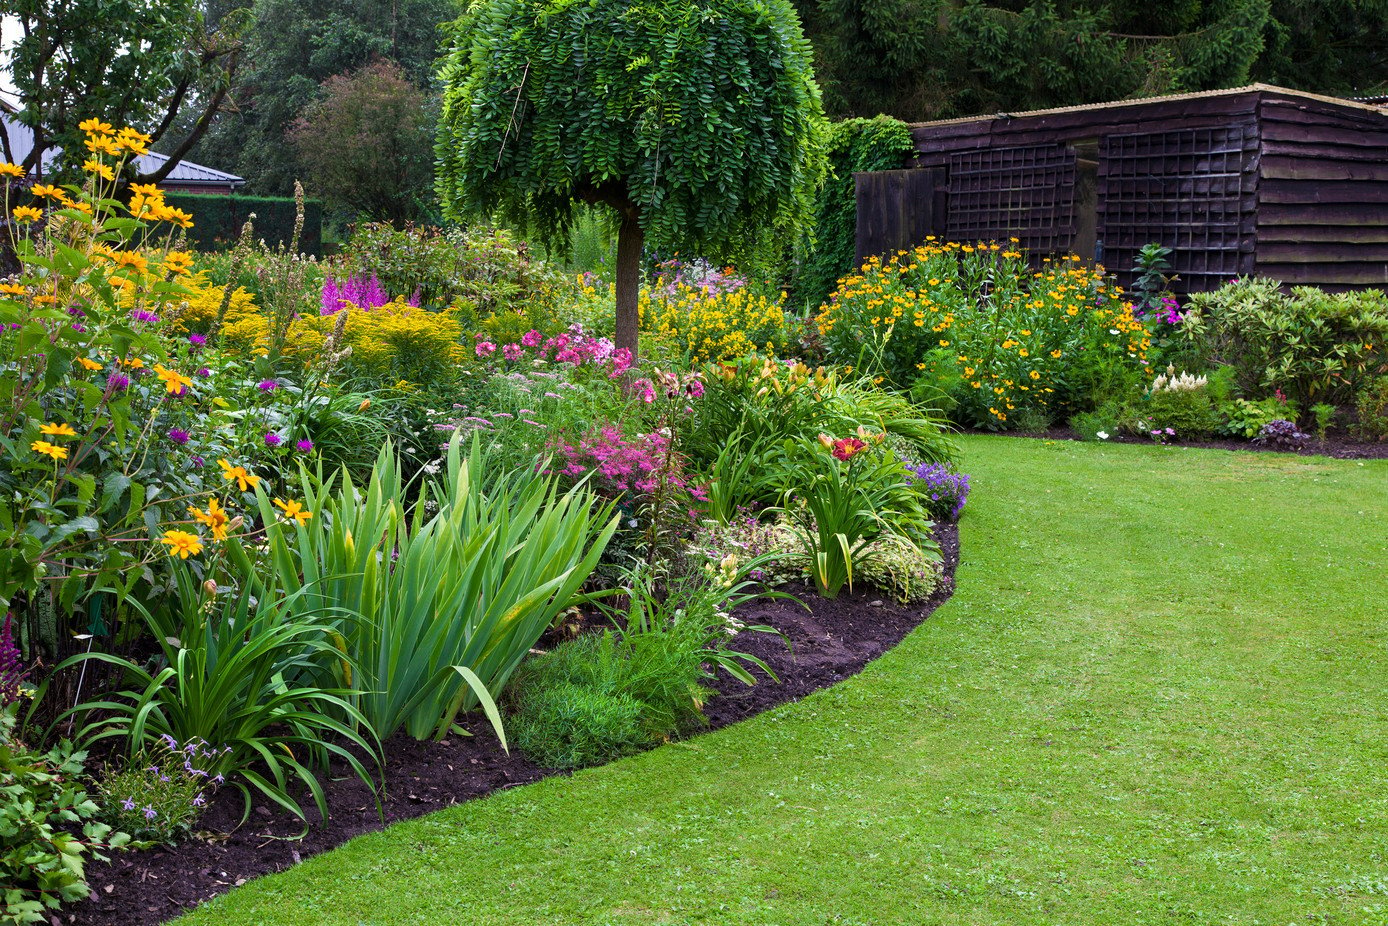 Creative Ideas To Landscape A Slope, How To Landscape A Steep Hill On Budget